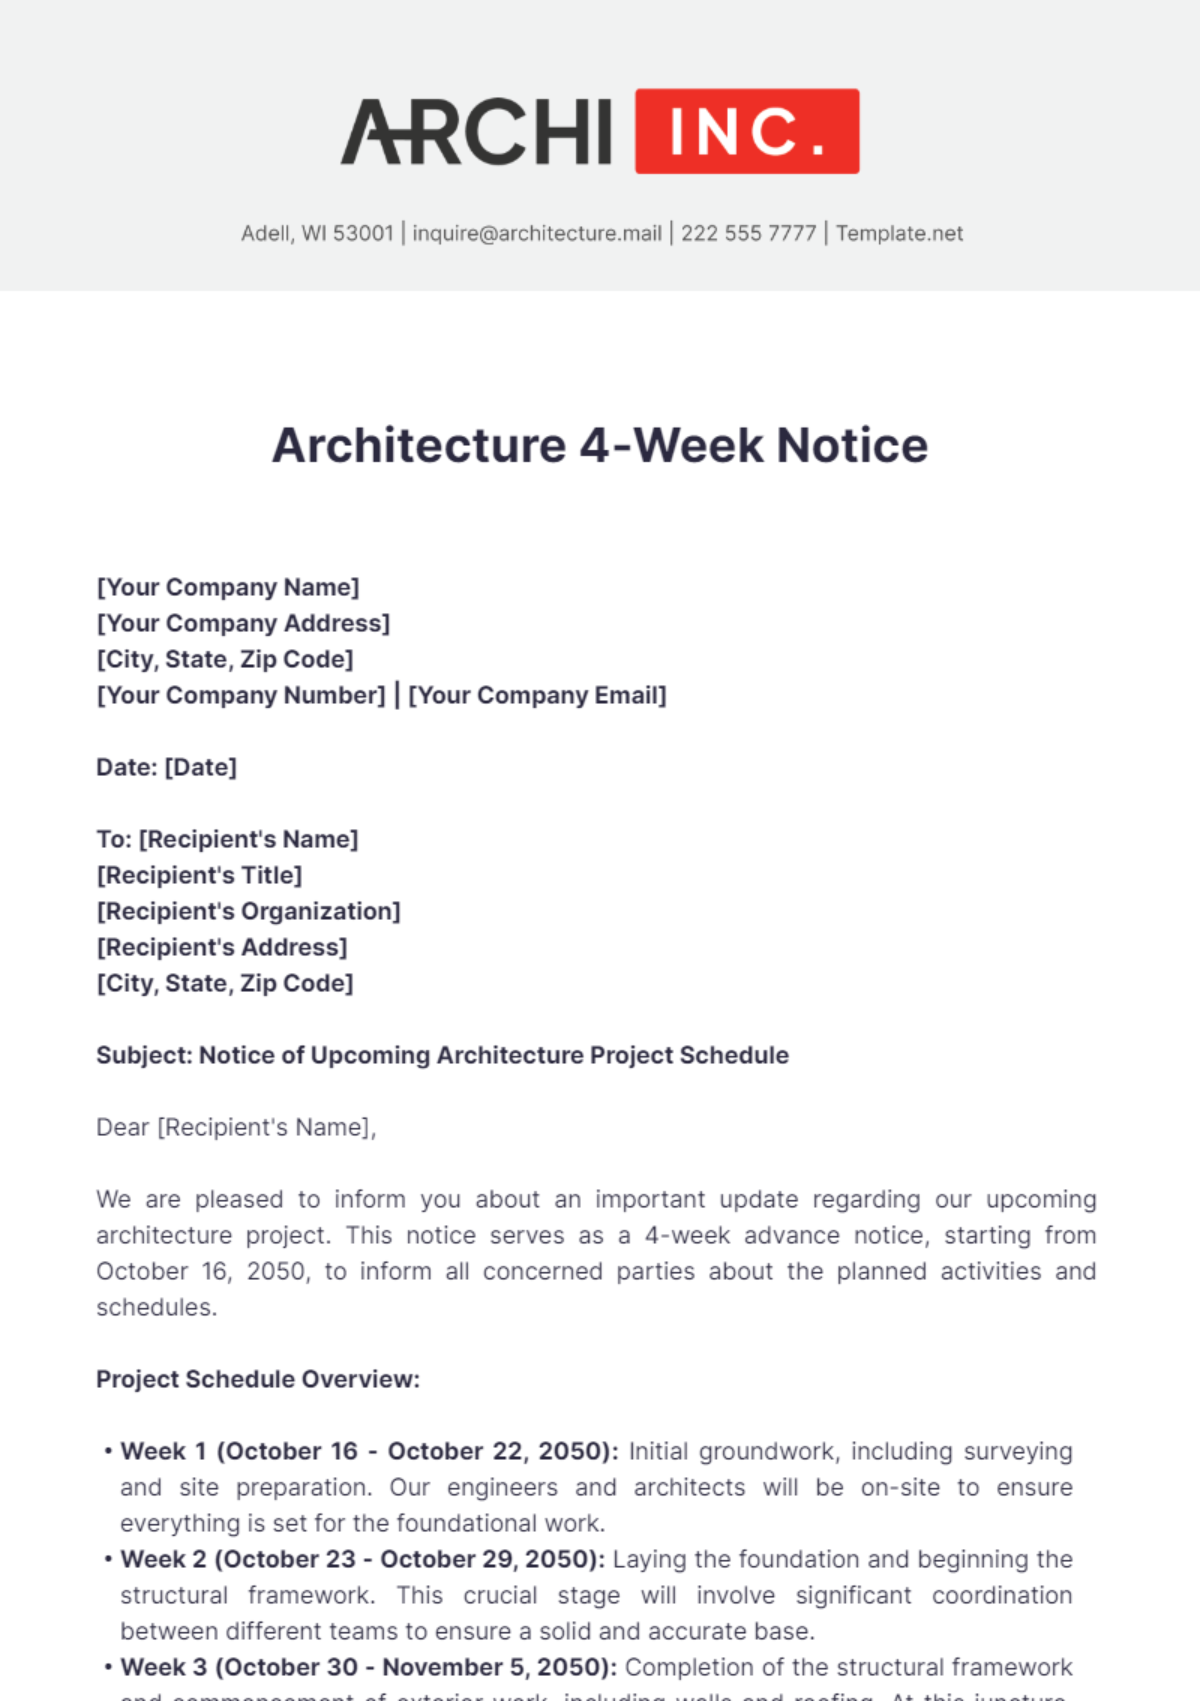 Free Architecture 4-Week Notice Template